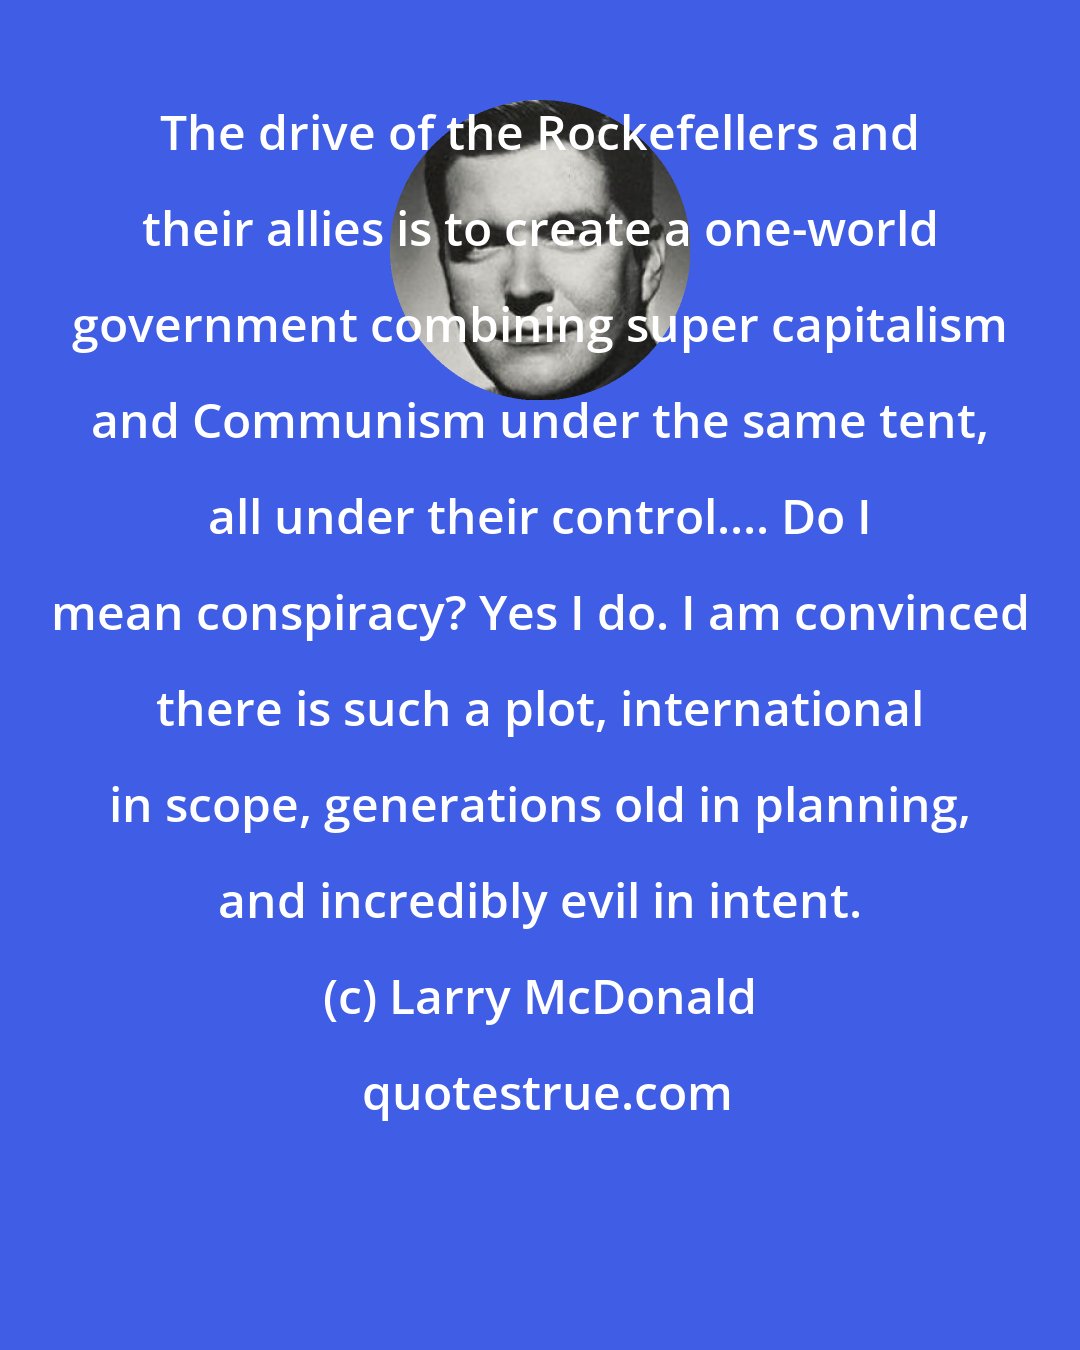 Larry McDonald: The drive of the Rockefellers and their allies is to create a one-world government combining super capitalism and Communism under the same tent, all under their control.... Do I mean conspiracy? Yes I do. I am convinced there is such a plot, international in scope, generations old in planning, and incredibly evil in intent.